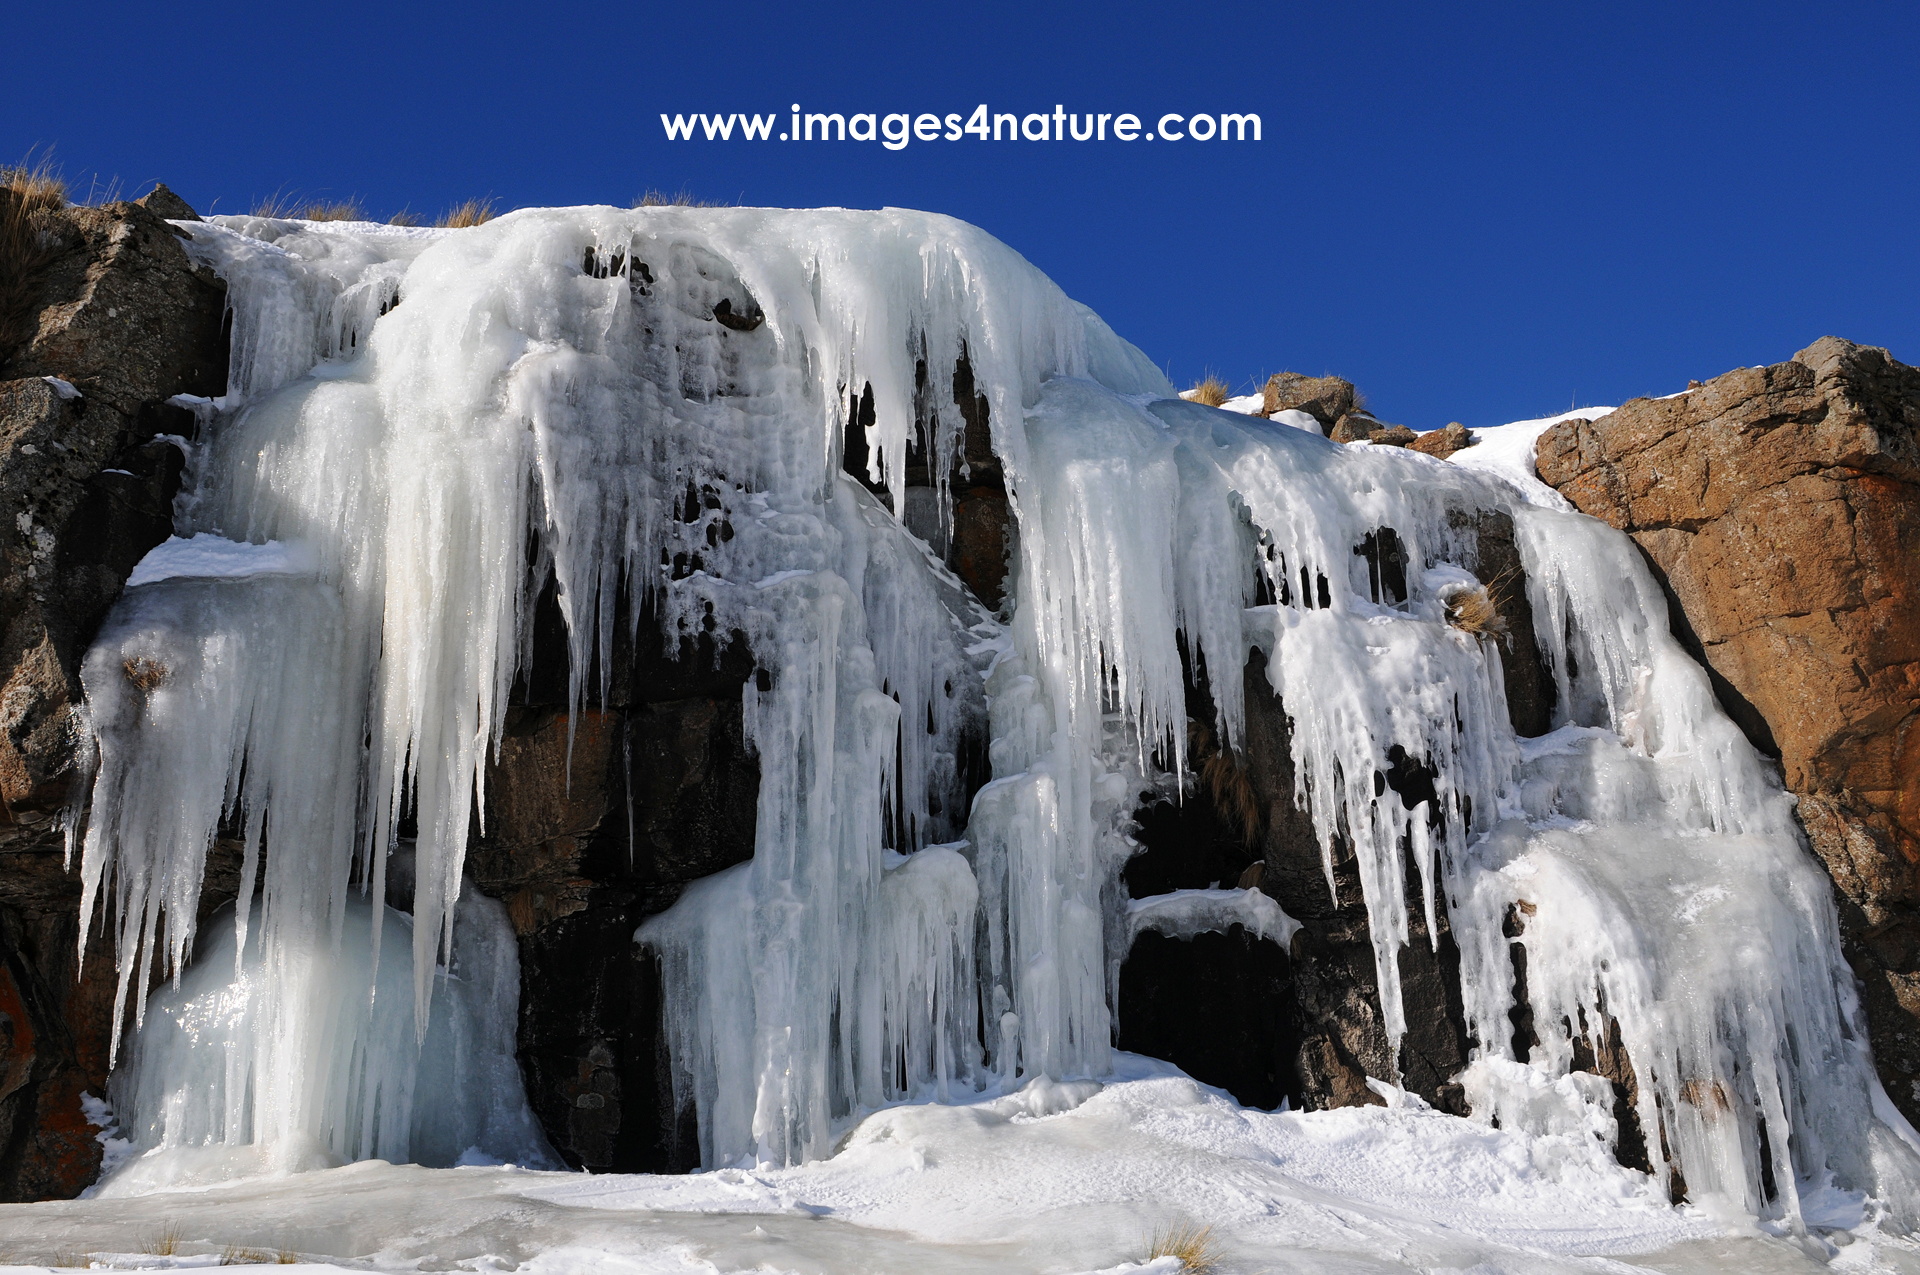 Red rocks in Lesotho winter landscape, covered with a frozen waterfall of icicles